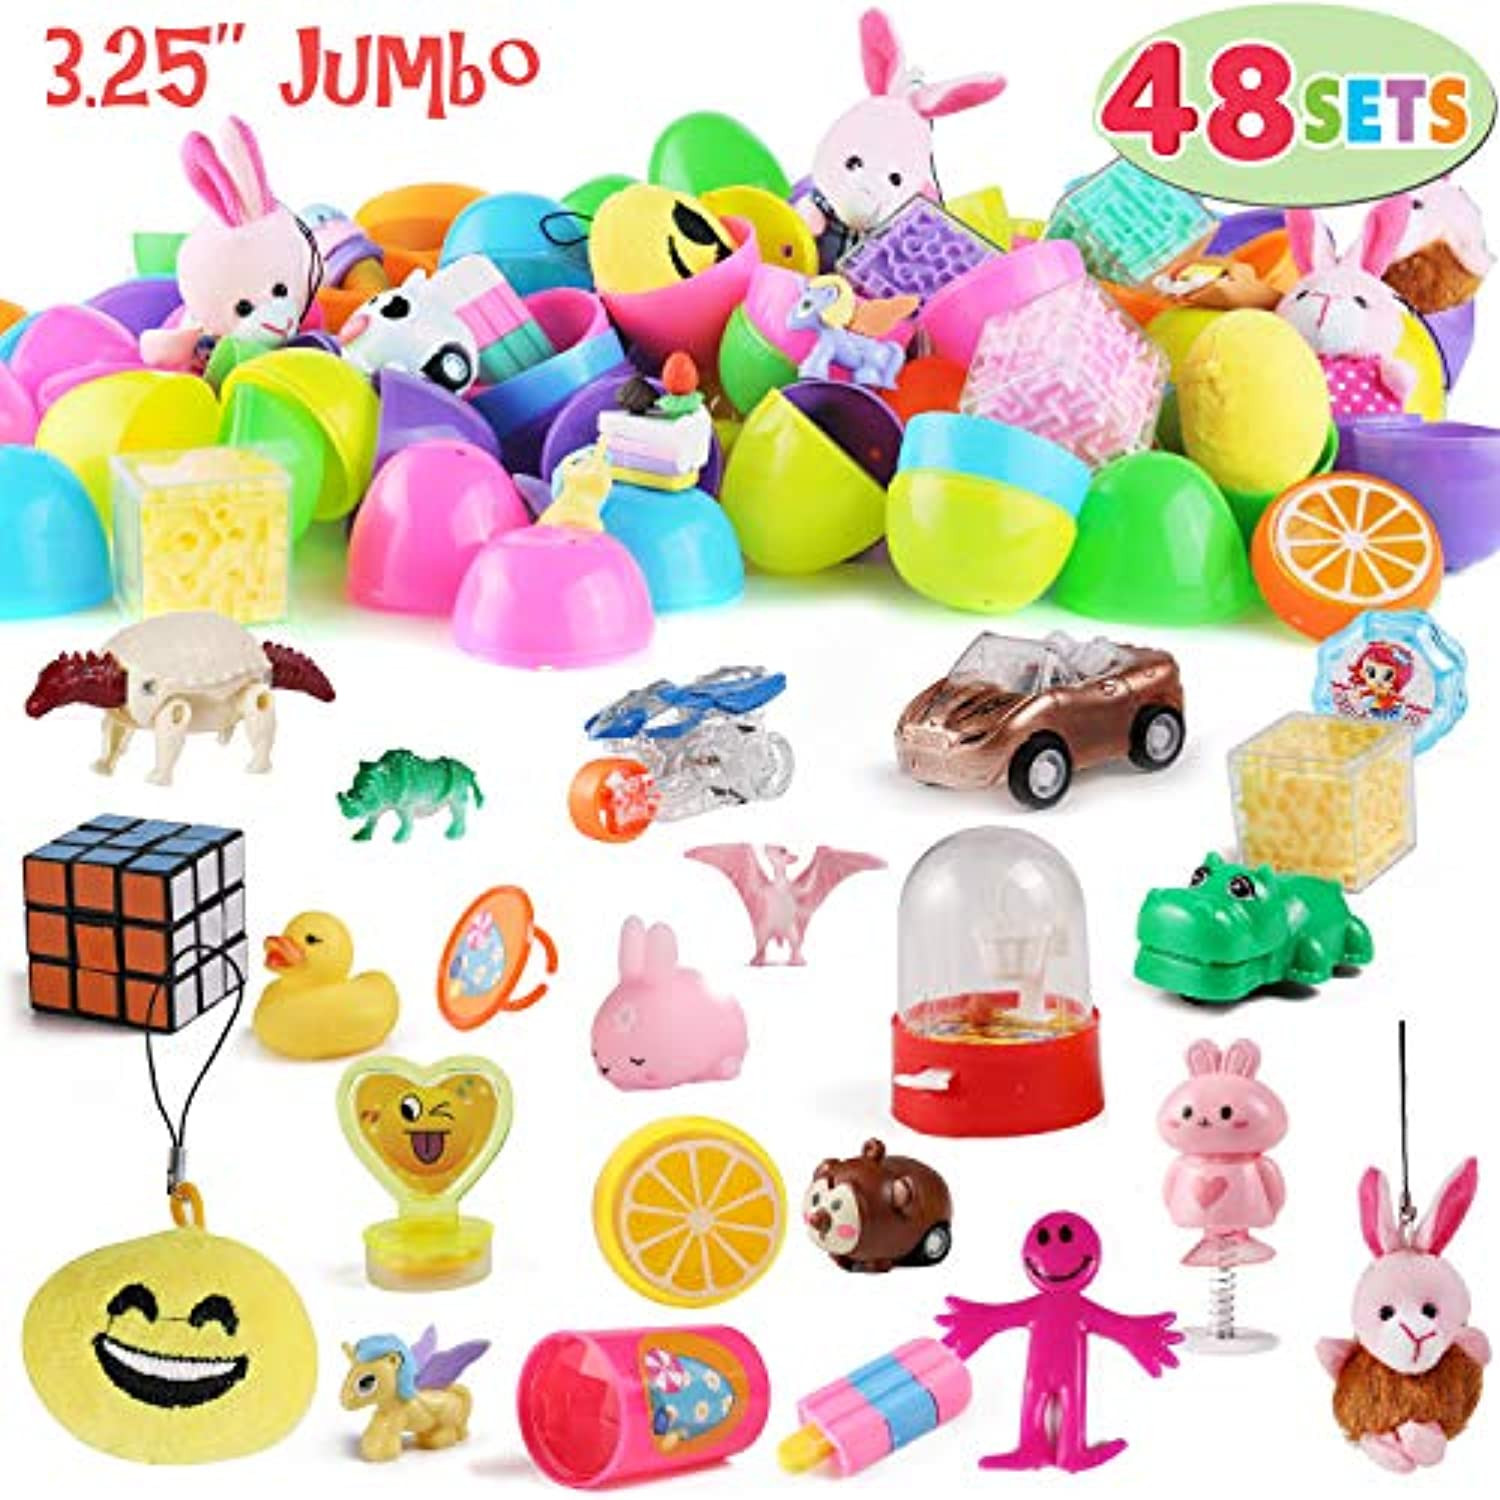 Party City Easter Eggs
 48 Pcs Toys filled Jumbo Easter Eggs 3 25â€ Pre Filled